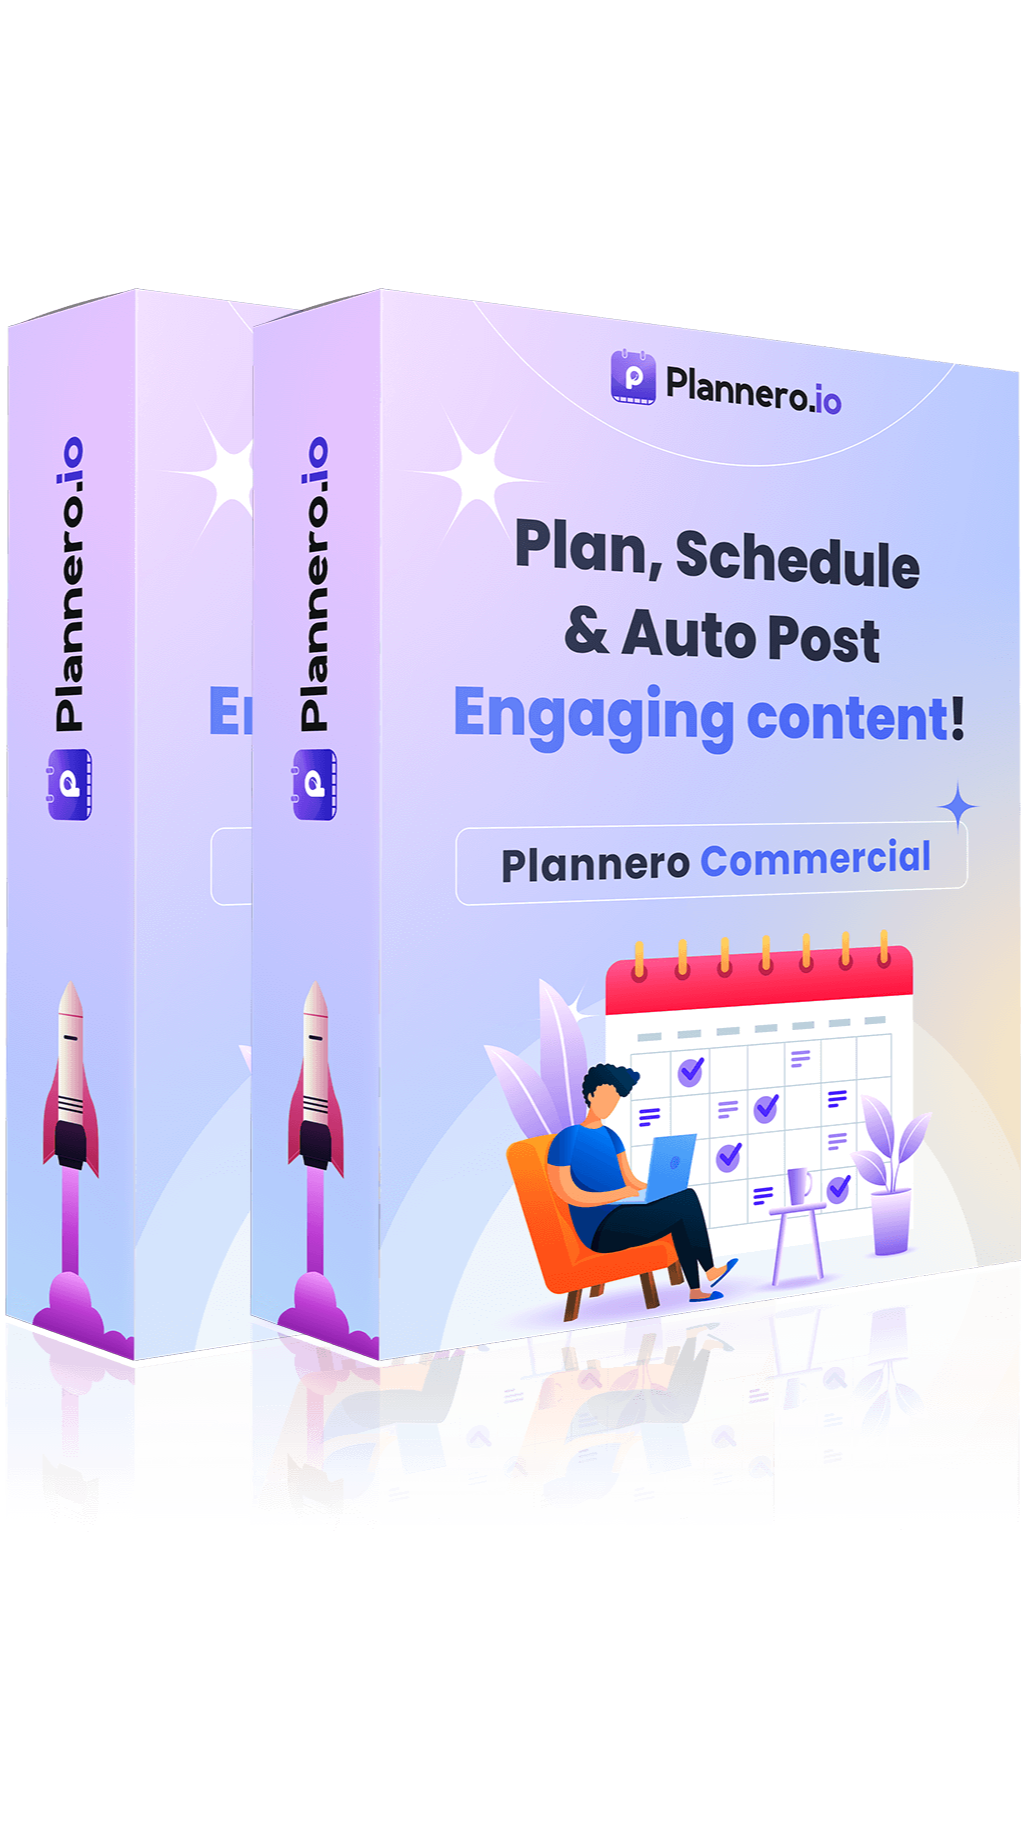 Social Media Creation & Planning App & Software For $47! Plannero For Business